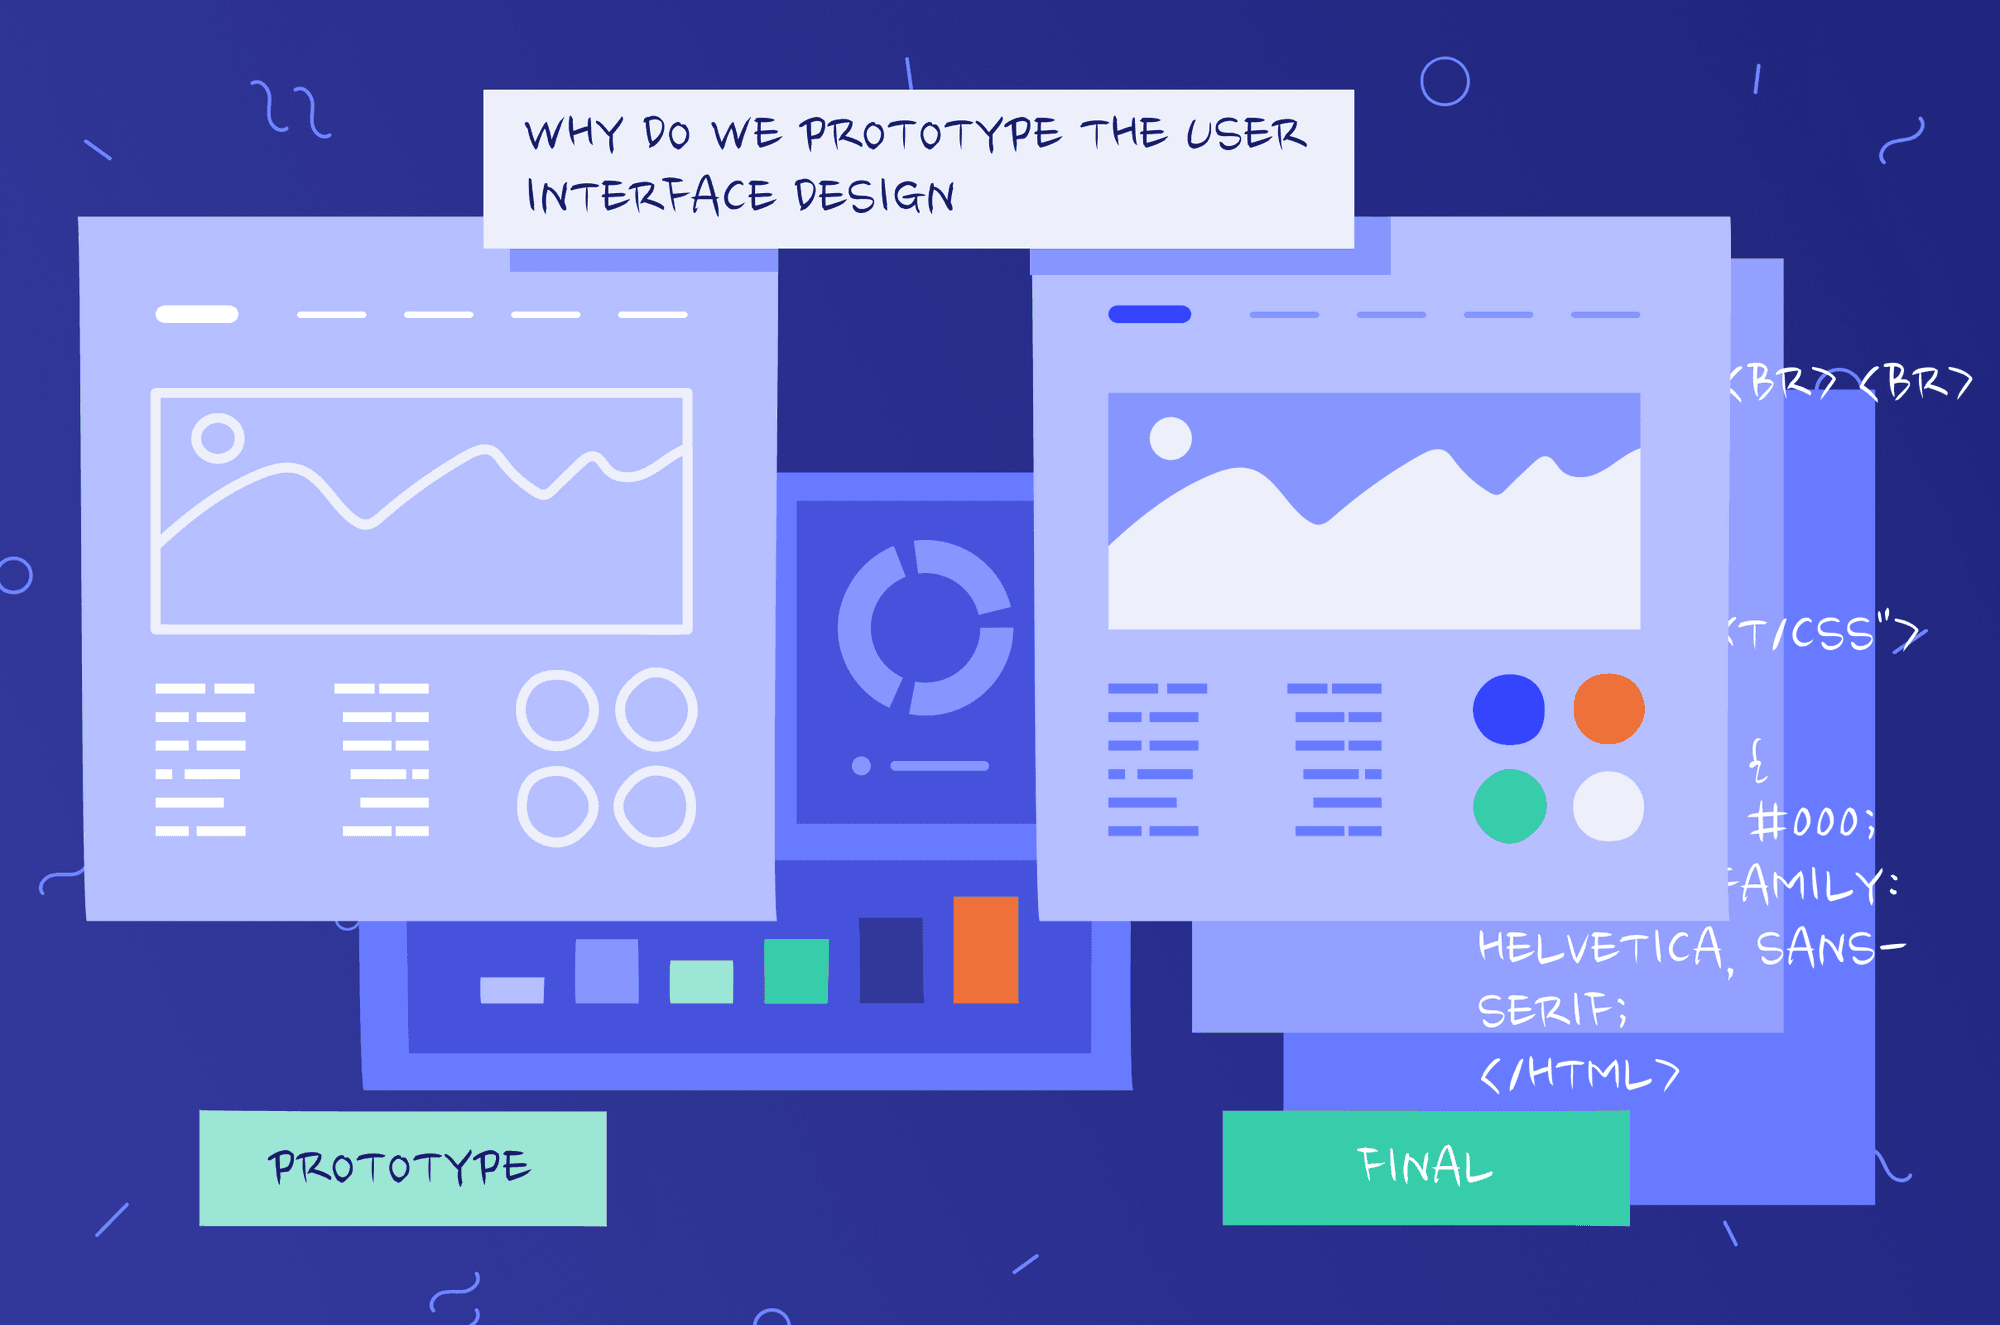 Why do we prototype the user interface design?